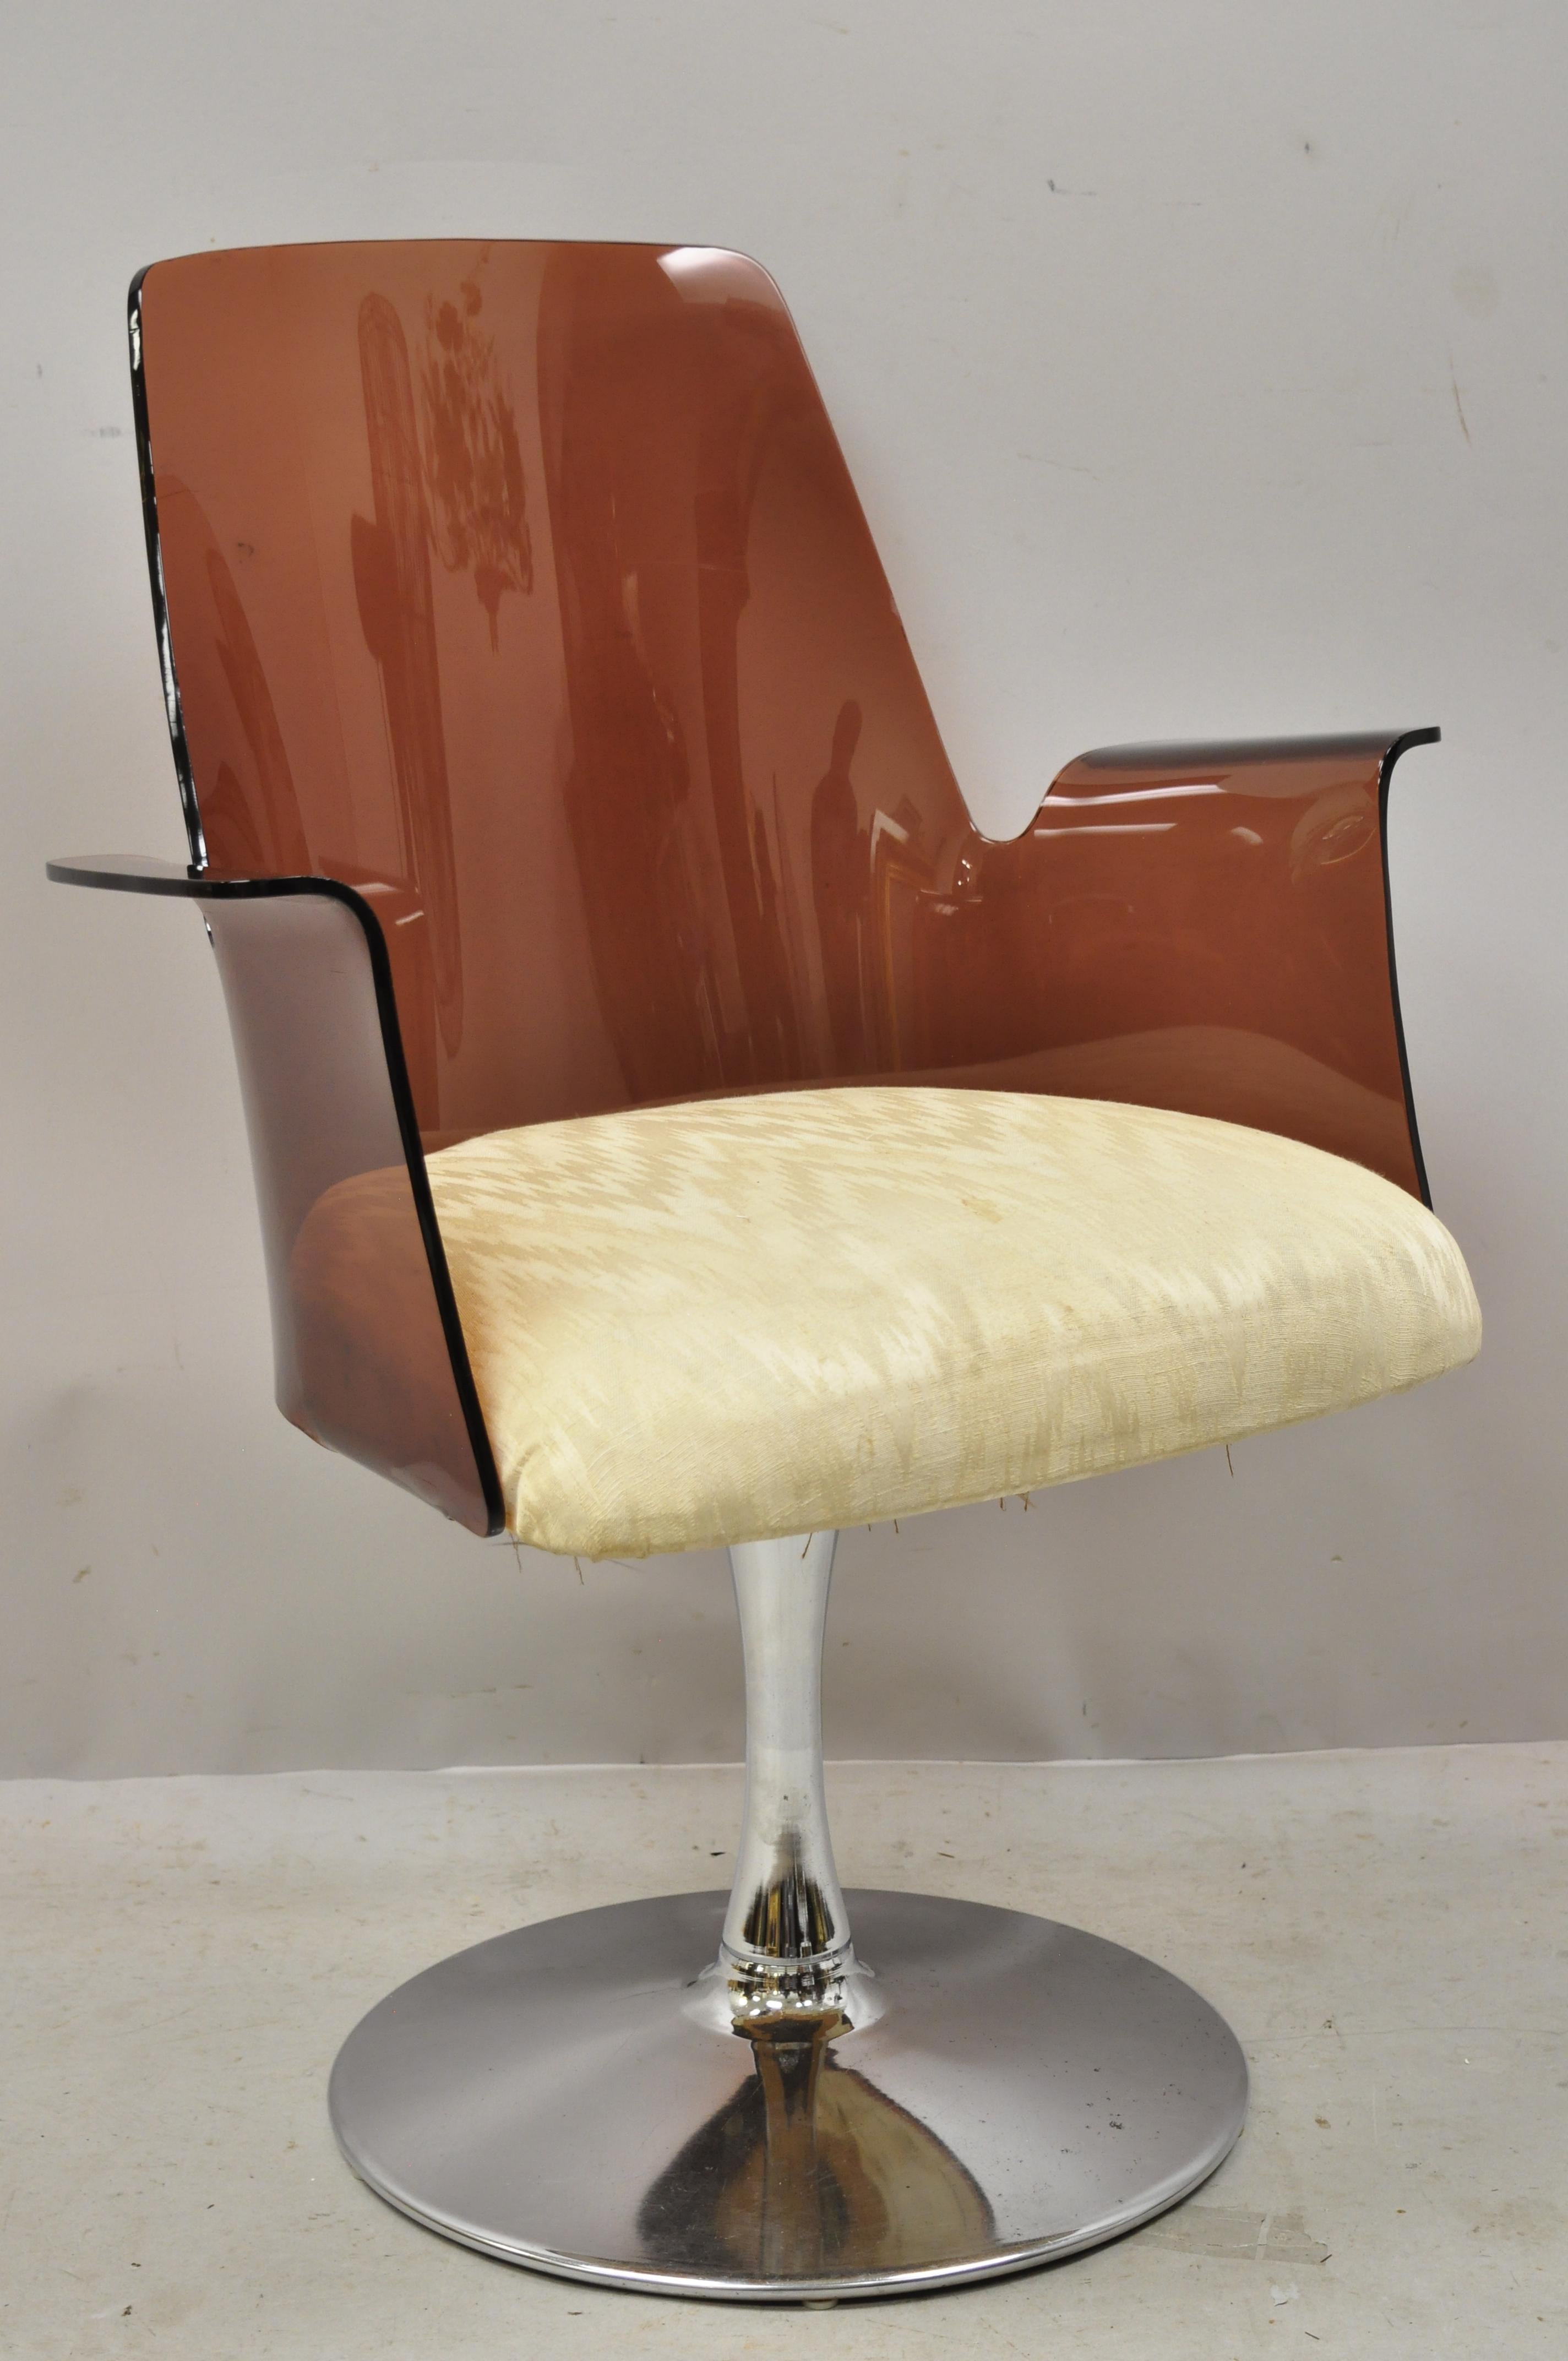 Vintage Laverne style curved cranberry Lucite tulip swivel base armchair (B). Item features a swivel seat, metal 